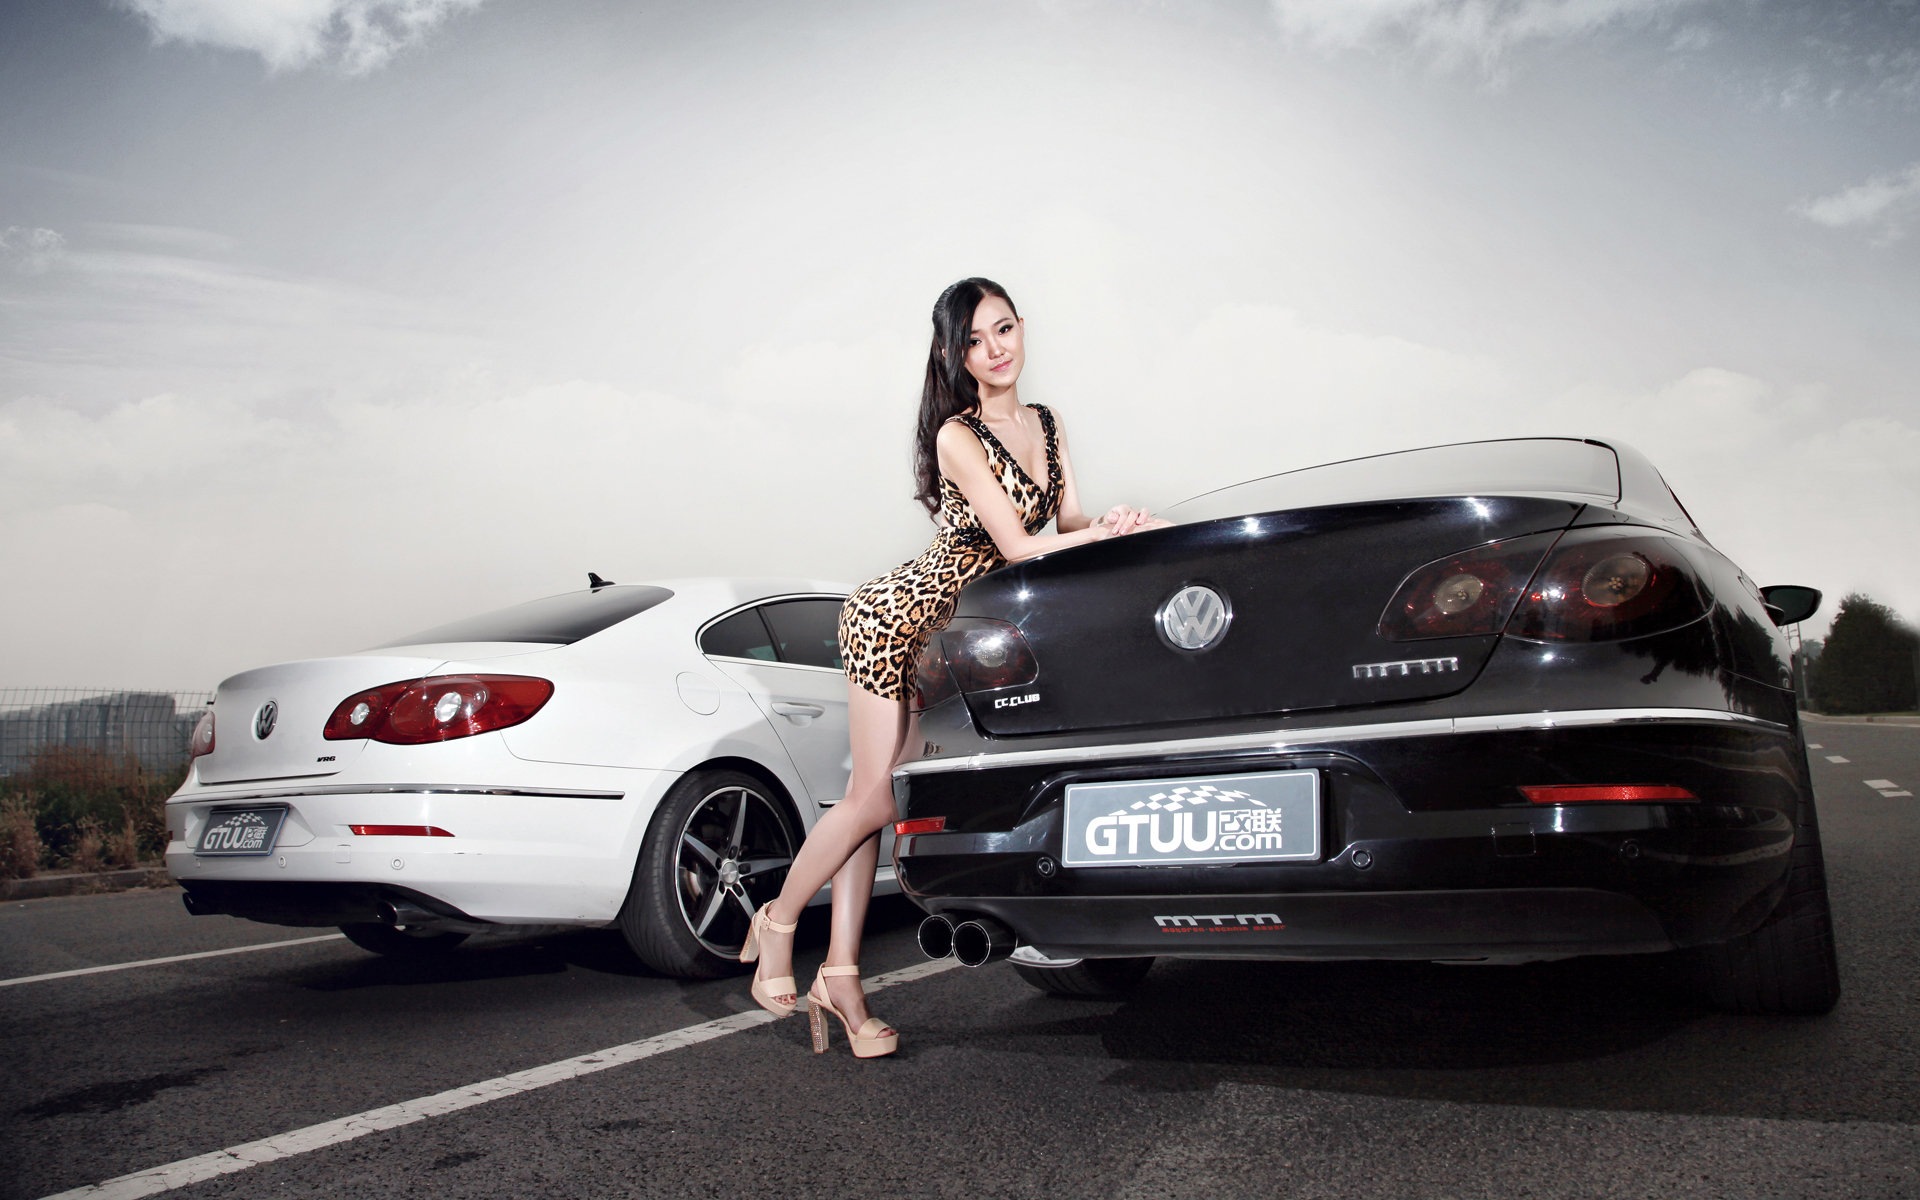 Beautiful leopard dress girl with Volkswagen sports car wallpapers #7 - 1920x1200